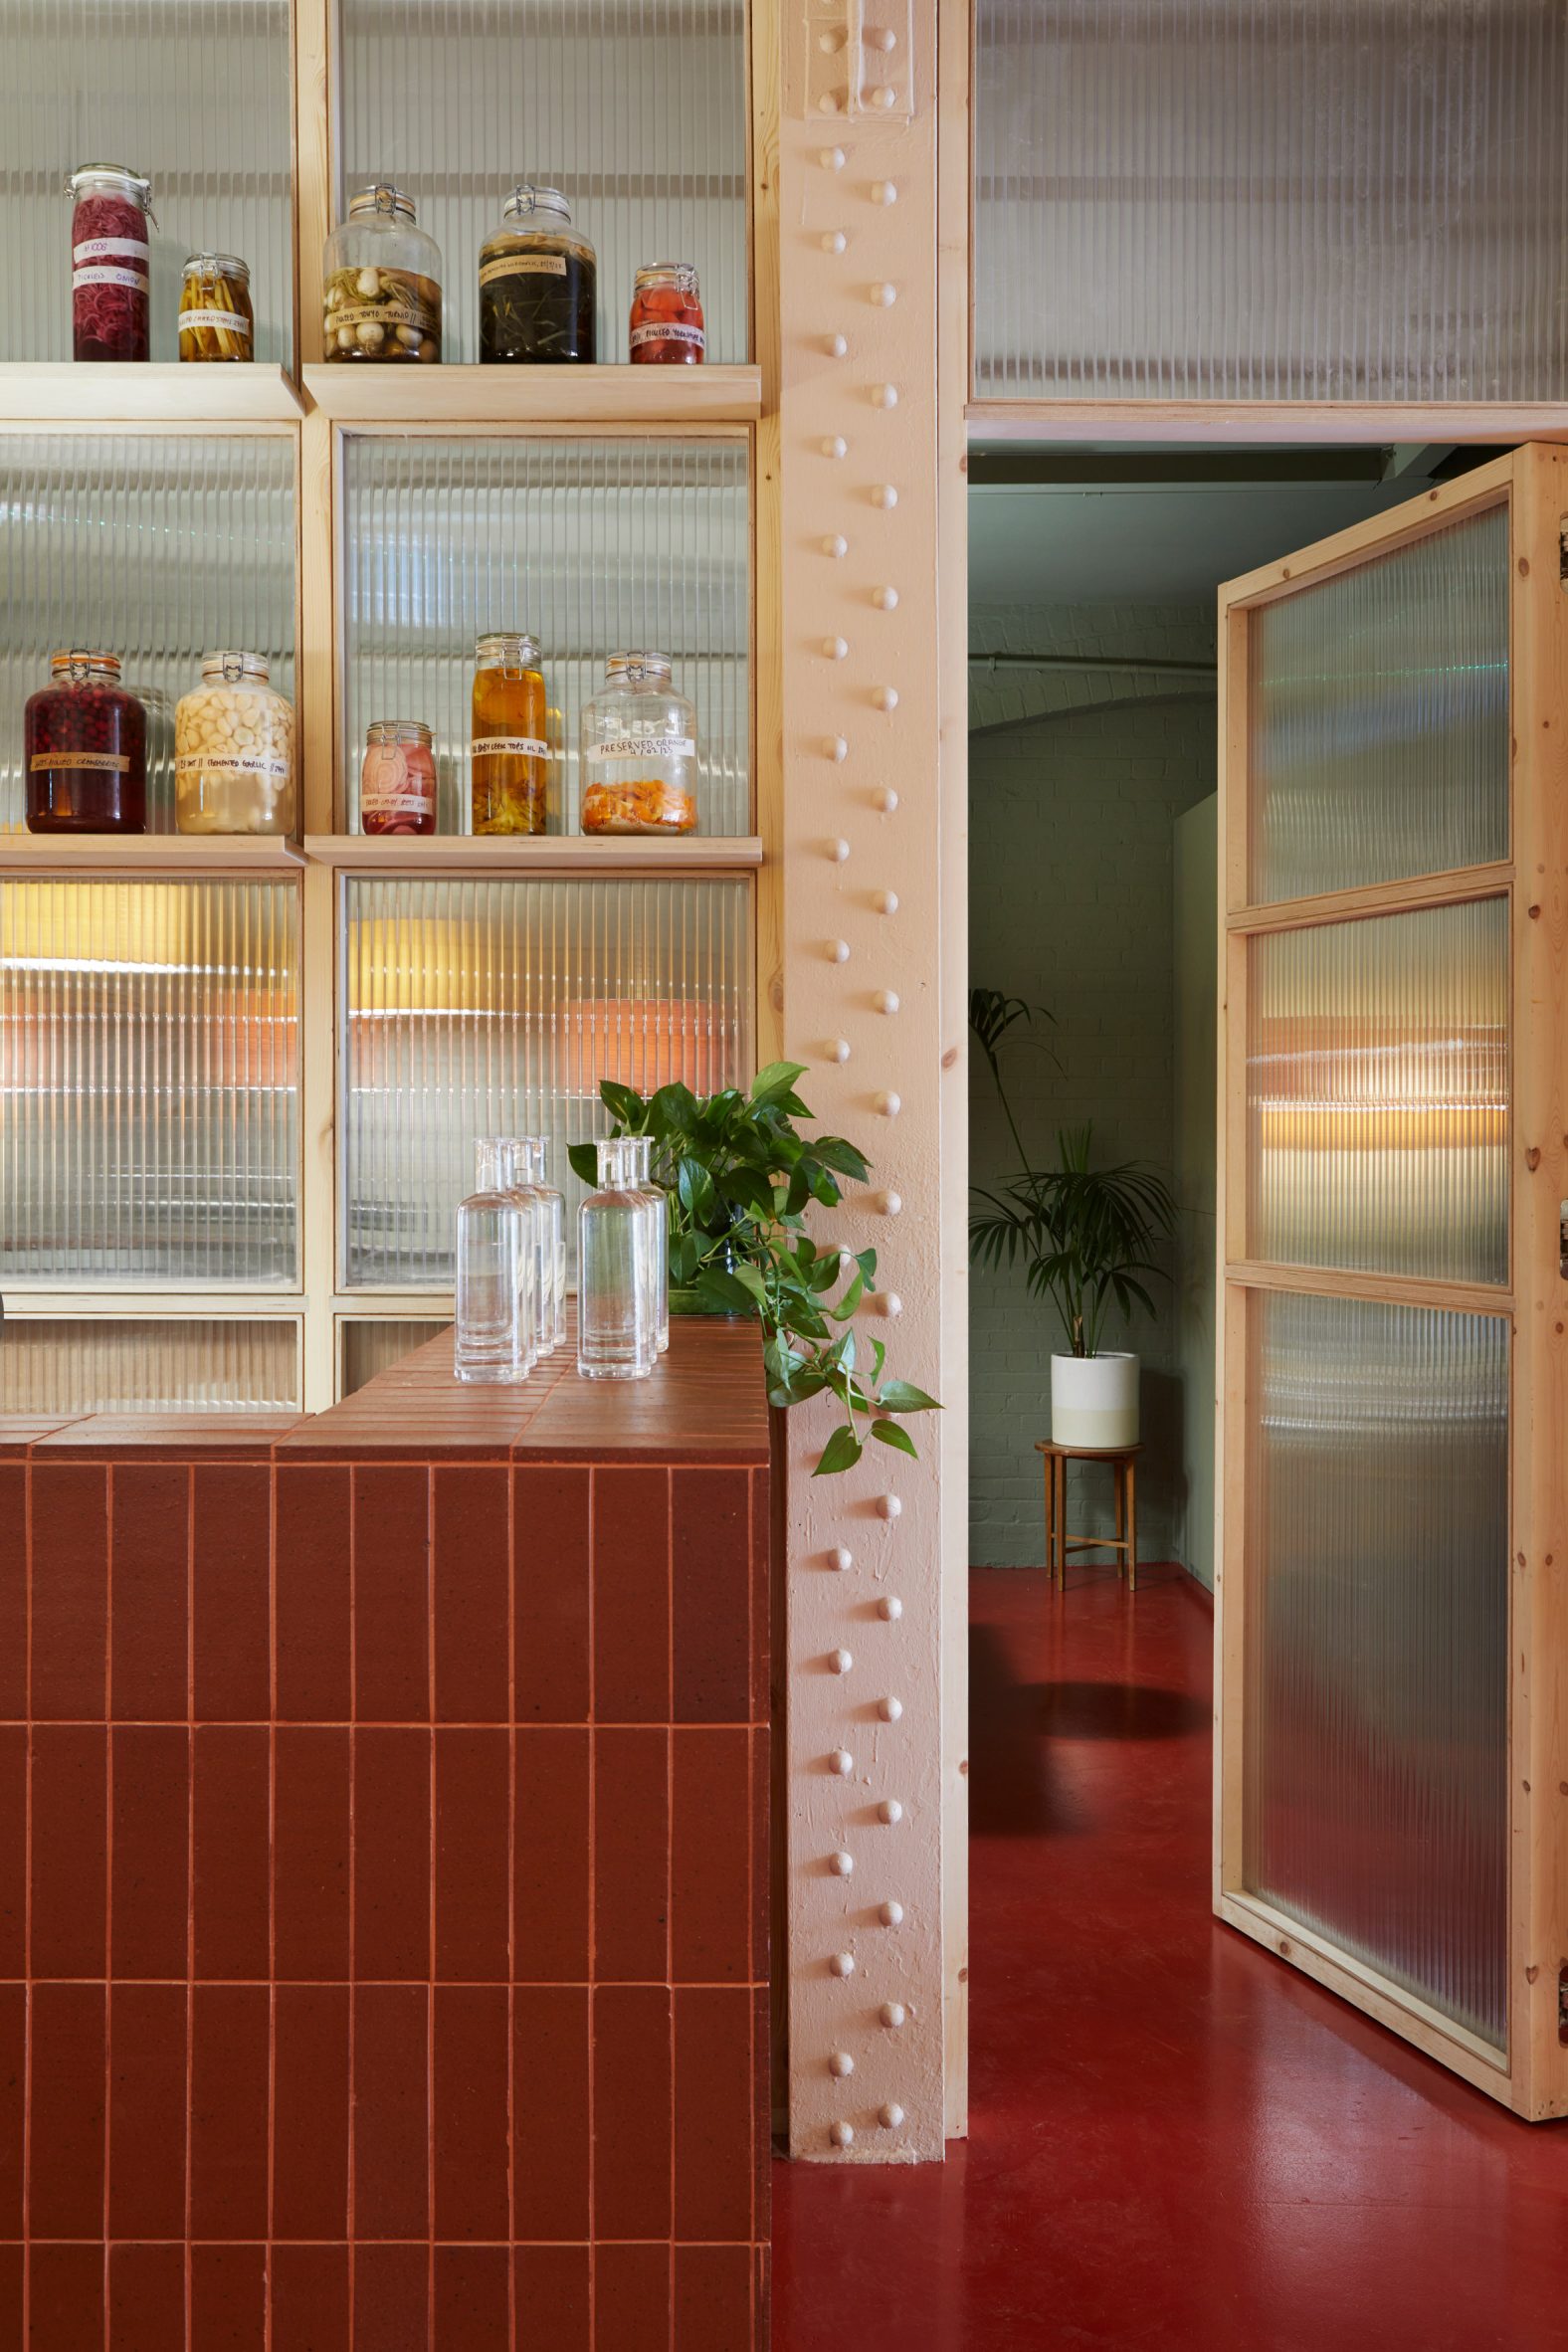 Polycarbonate wall with wooden shelves